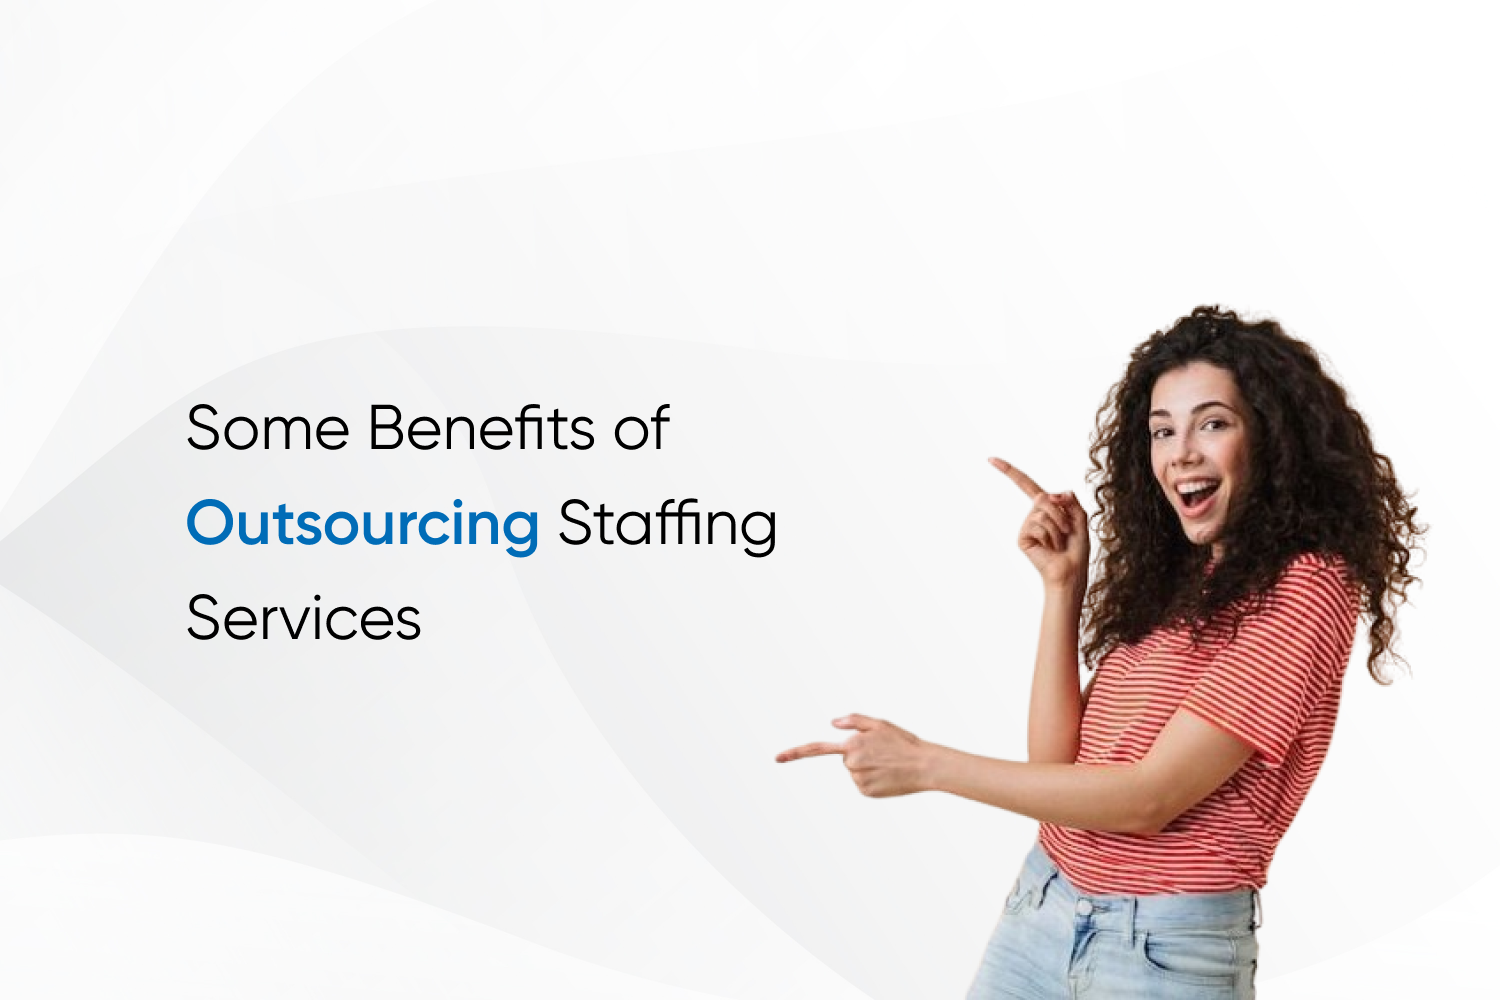 Some Benefits of Outsourcing Staffing Services